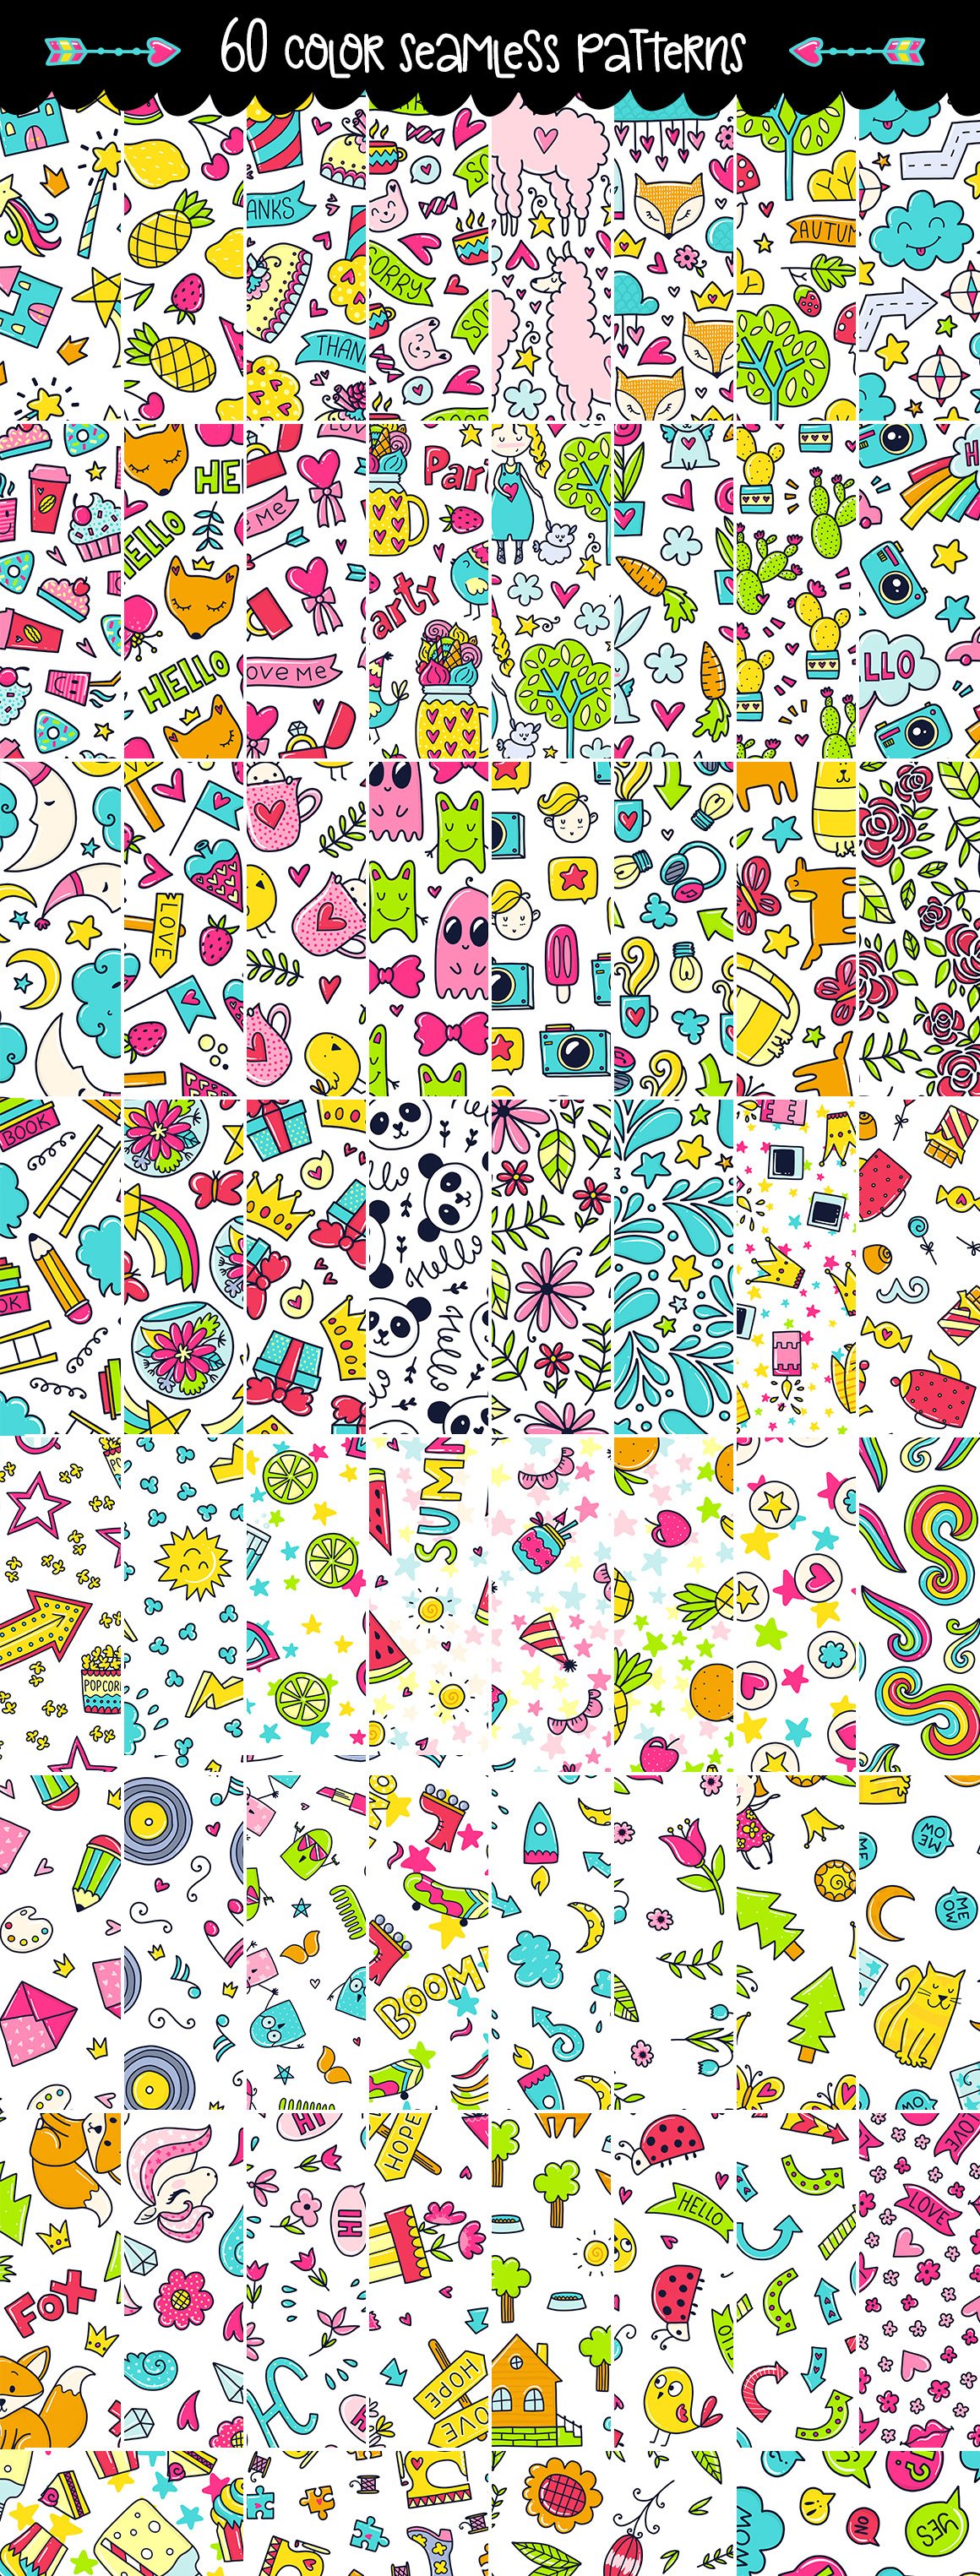 645 Doodles and Patterns - Clipart Set